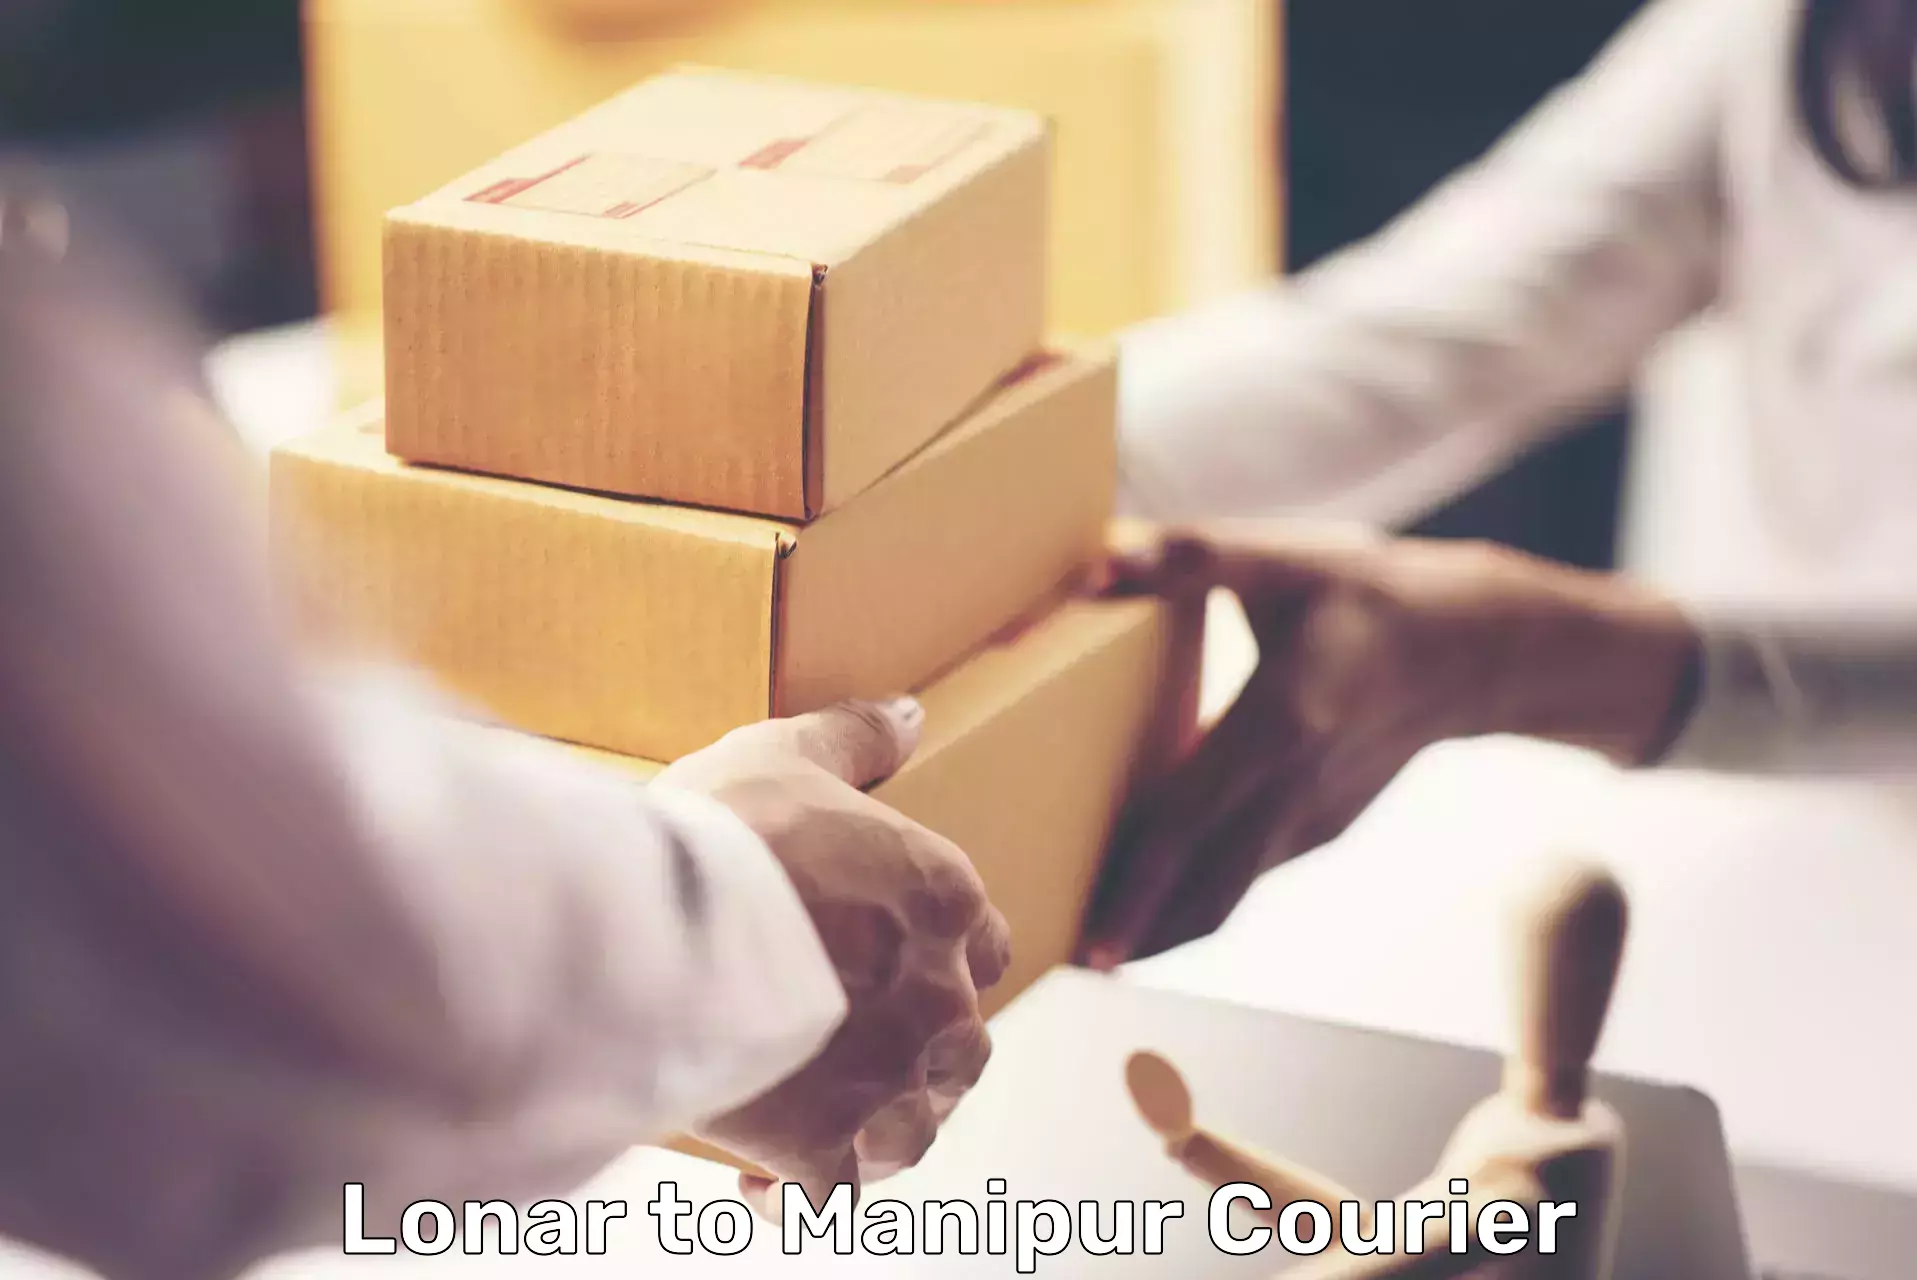 Business delivery service Lonar to Chandel